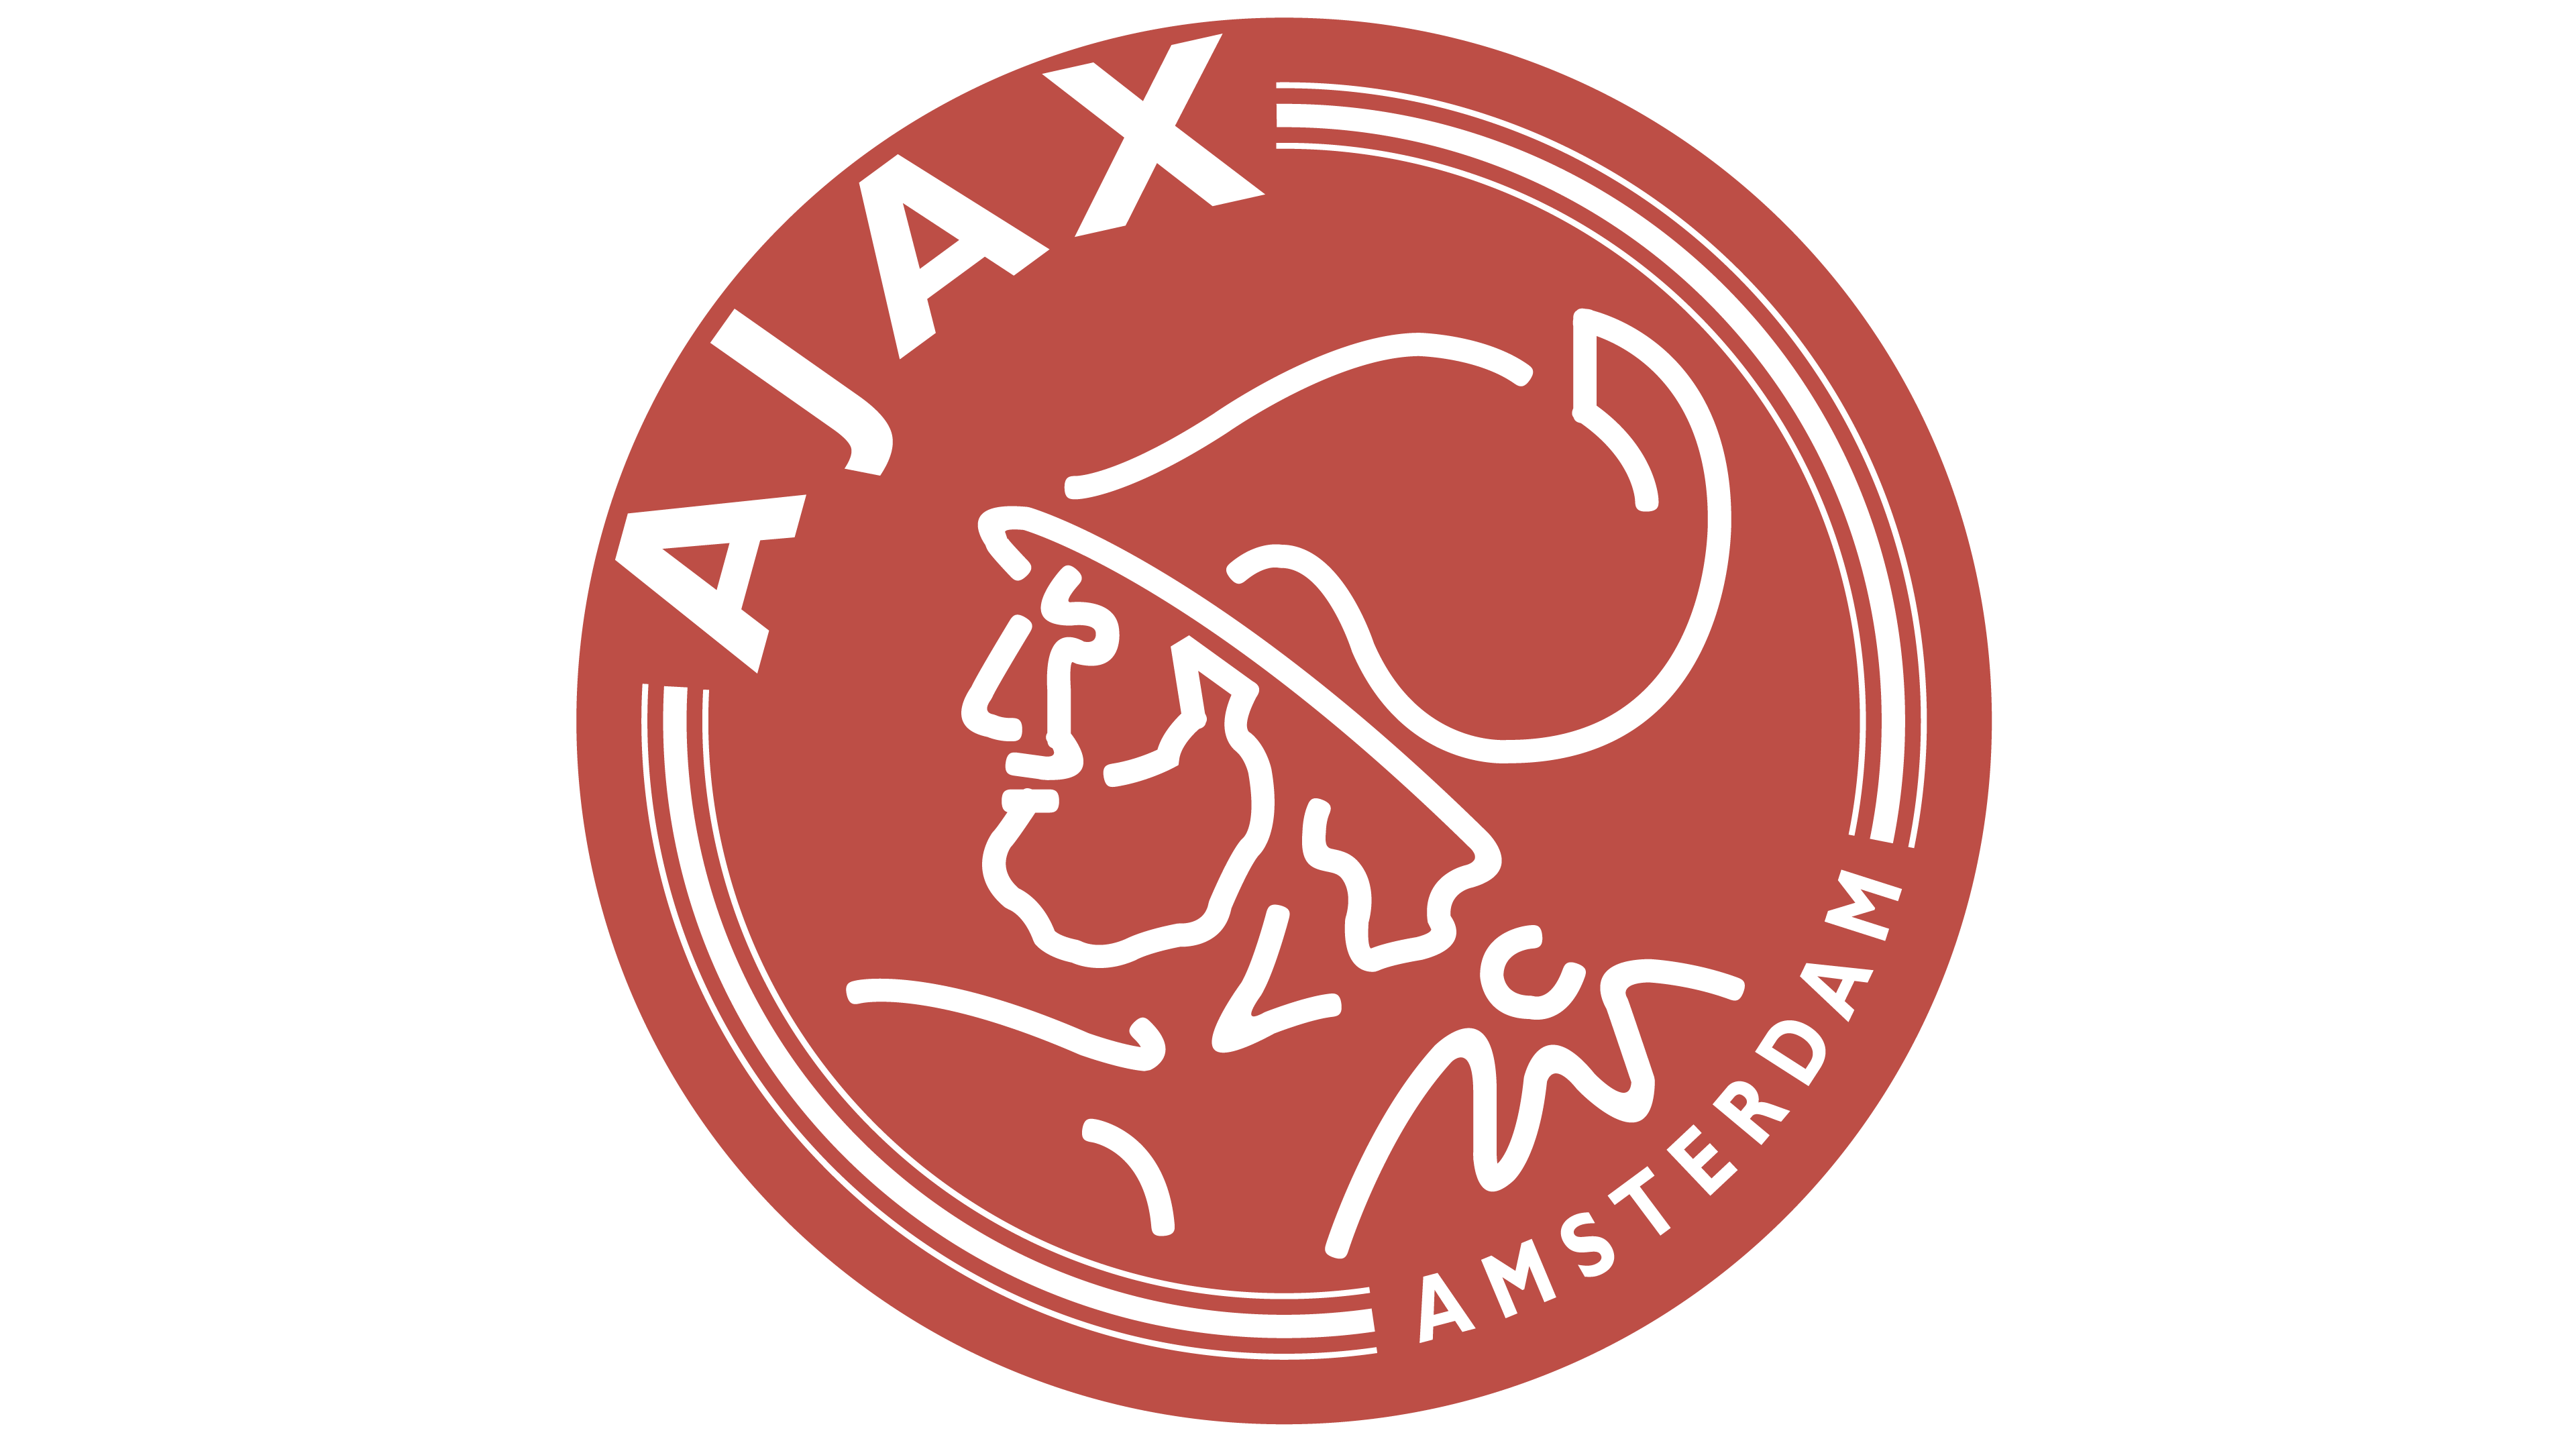 AFC Ajax History, Ownership, Squad members, Support Staff and Honors